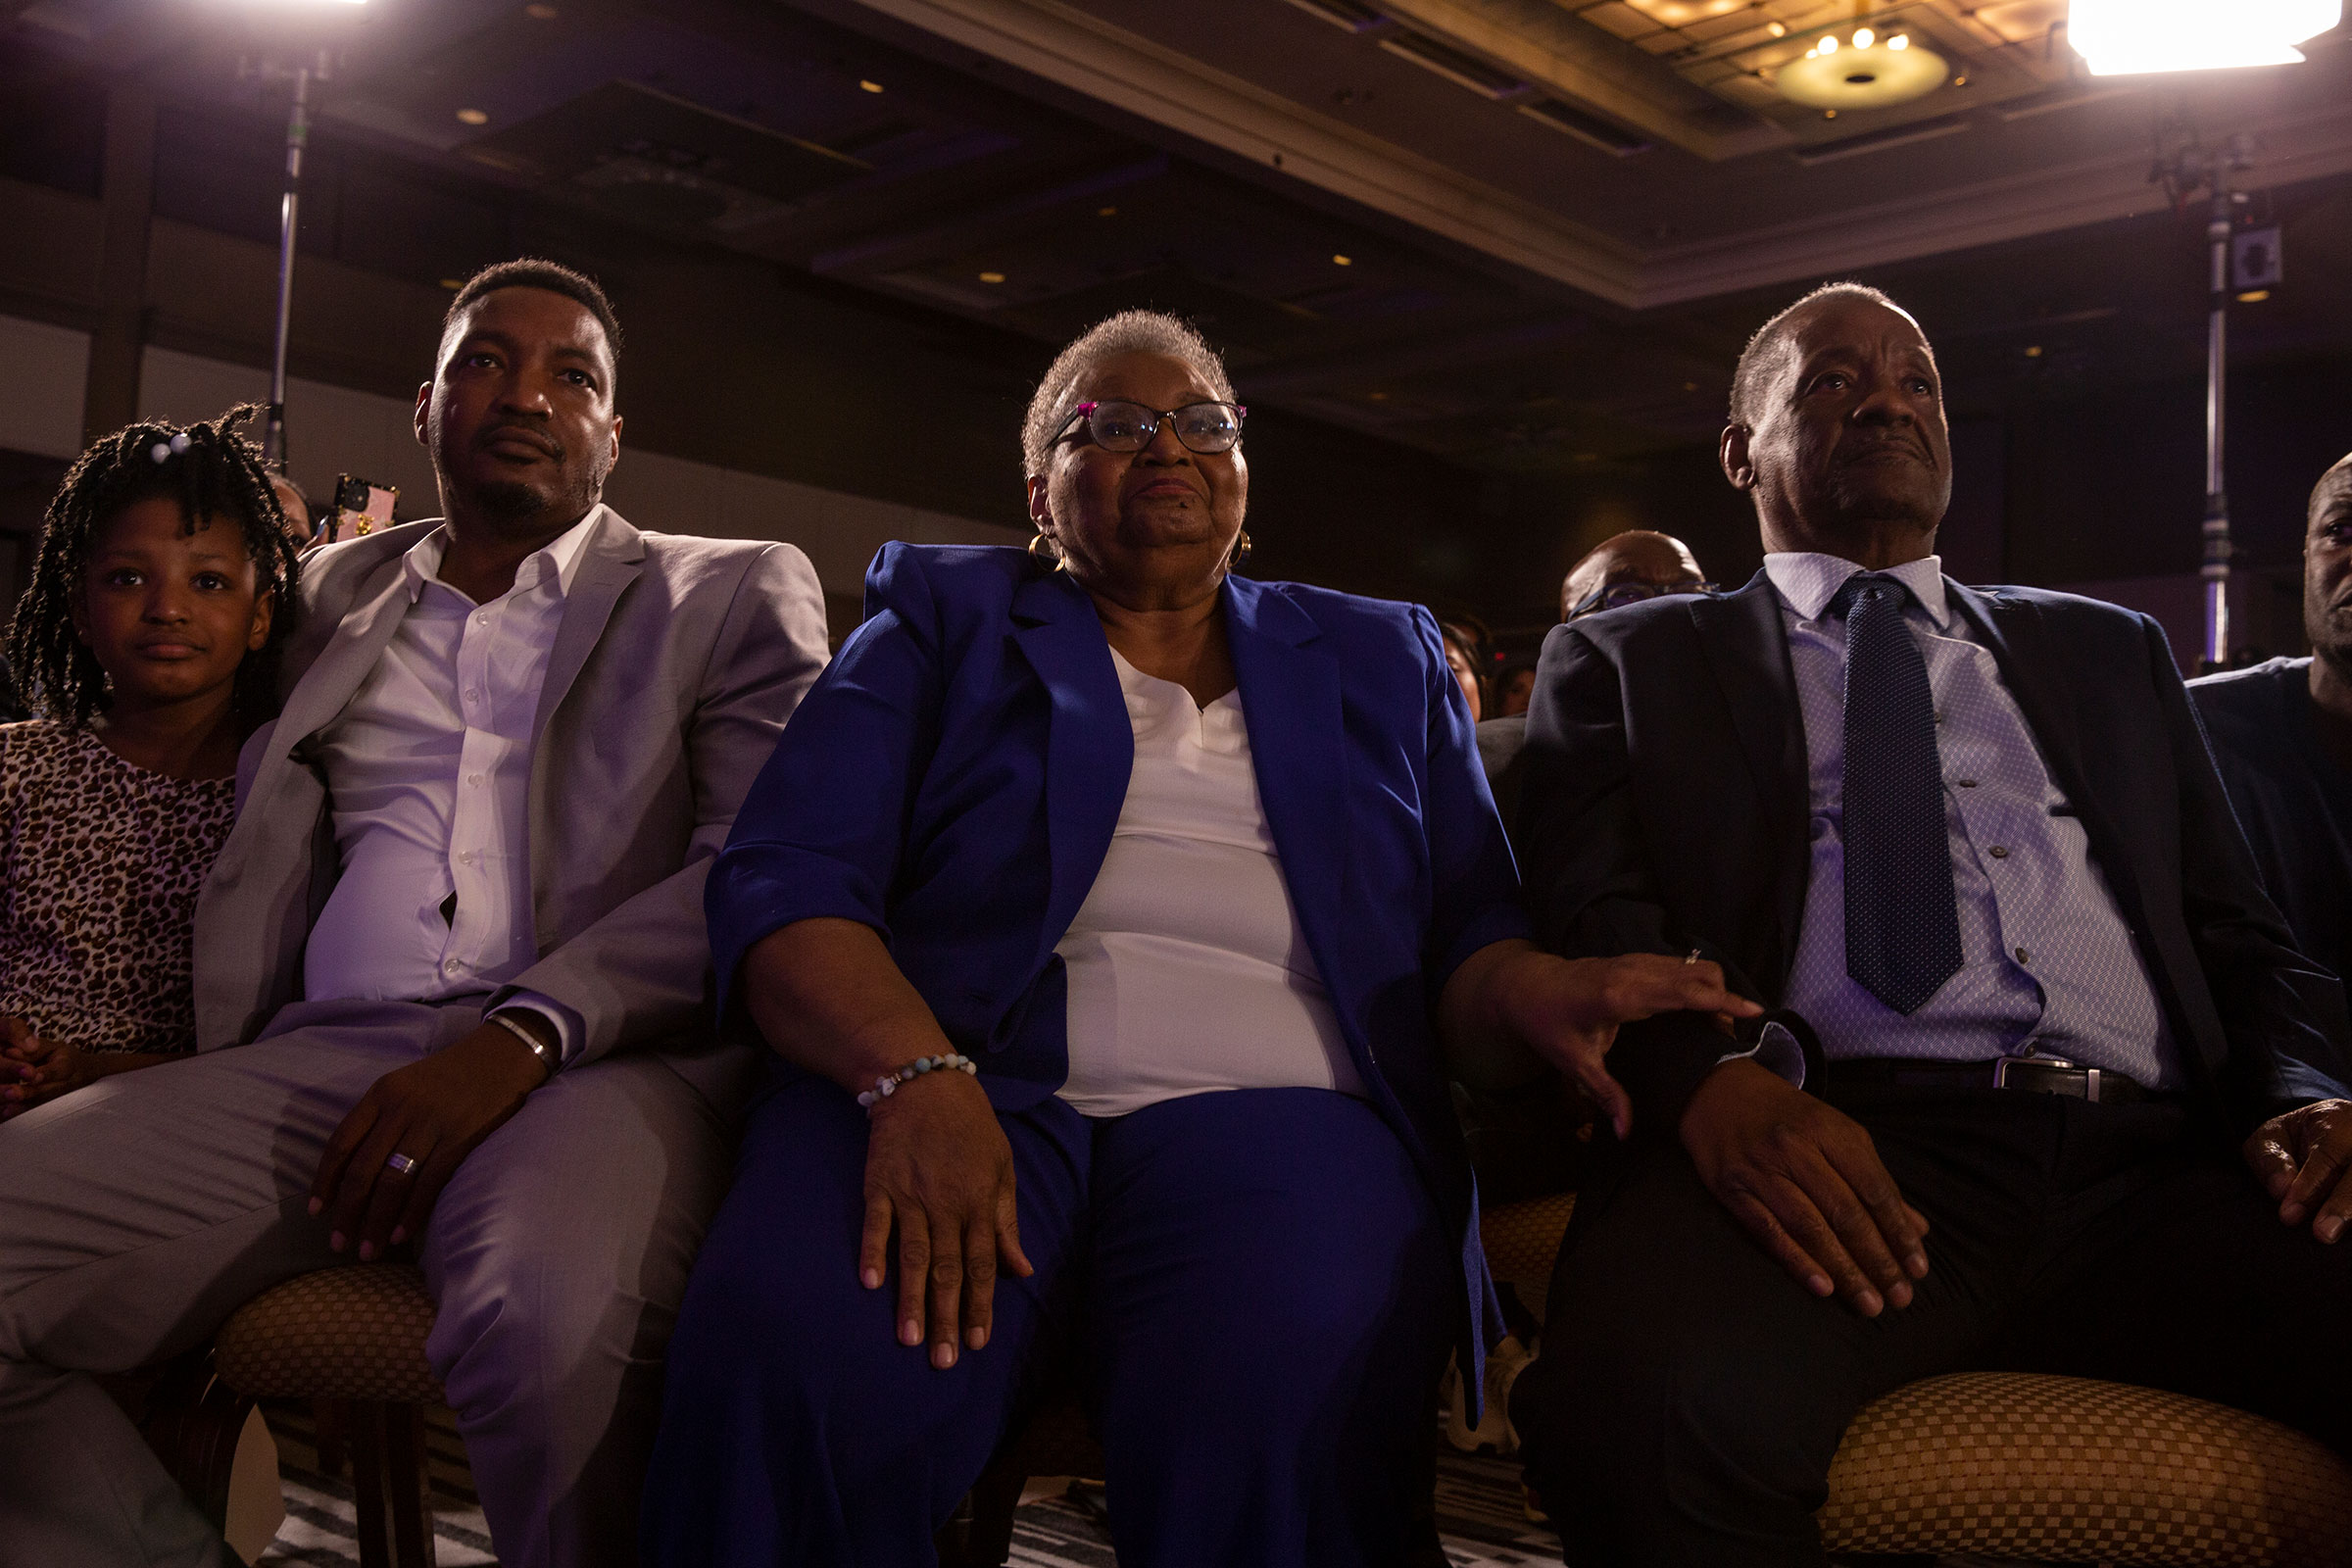 Richard Abrams, brother of Stacey Abrams, and Carolyn (C) and Robert (R) Abrams, parents of Stacey Abrams, listen as she speaks to supporters at an election-night event in Atlanta on Nov. 8, 2022. (Gillian Laub for TIME)